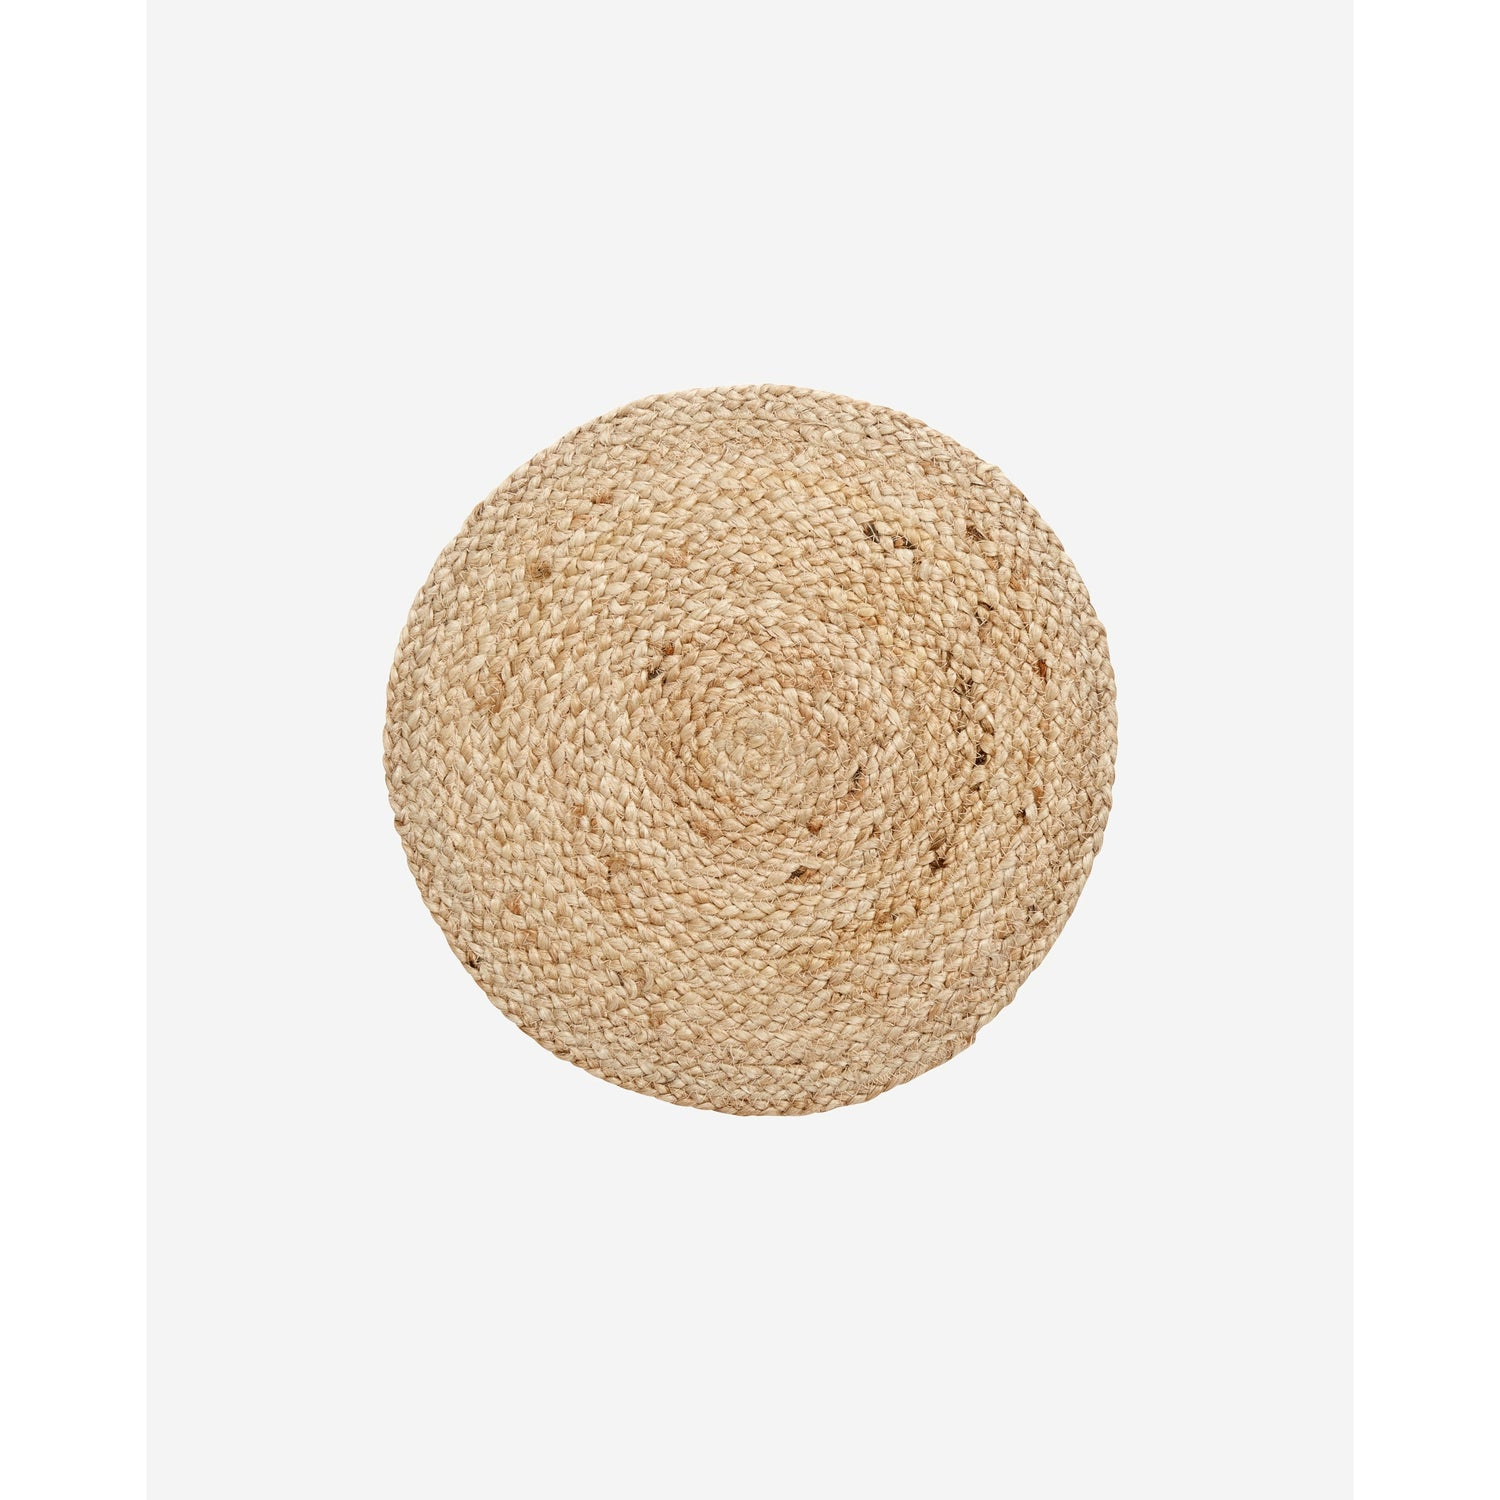 Nordal - Round cover in Jute - Ø35 cm - Nature - set of 4 pcs.